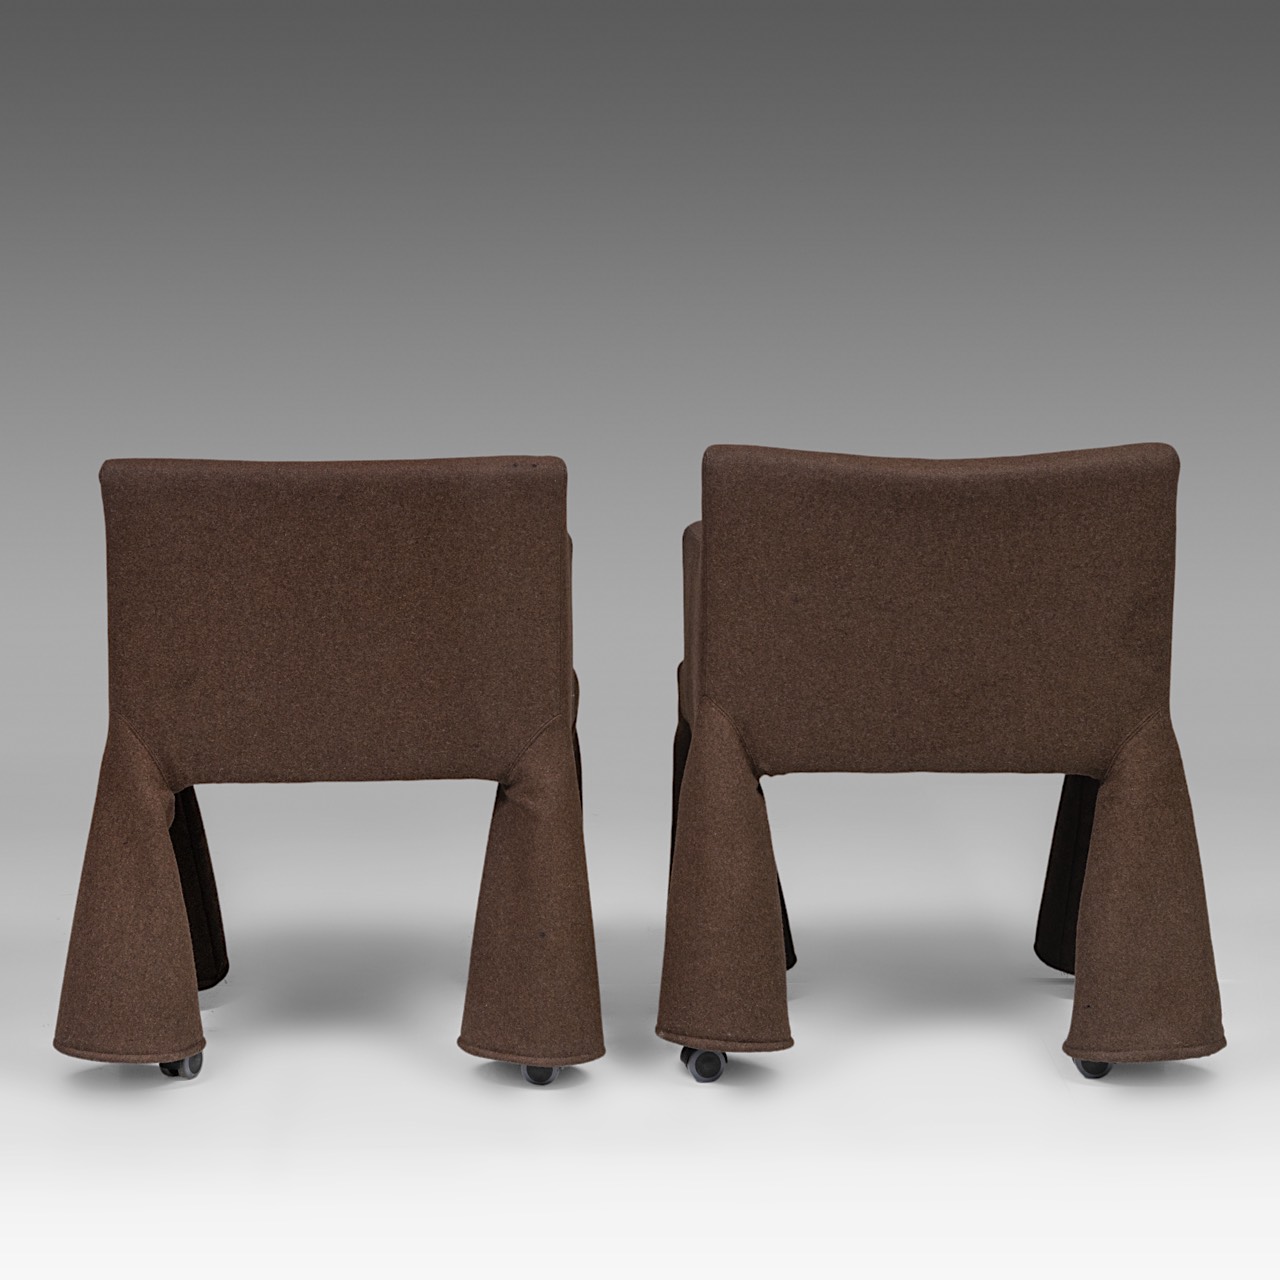 A pair of 'VIP' chairs by Marcel Wanders, the Netherlands, 2000, H 82 - W 60 cm - Image 5 of 9